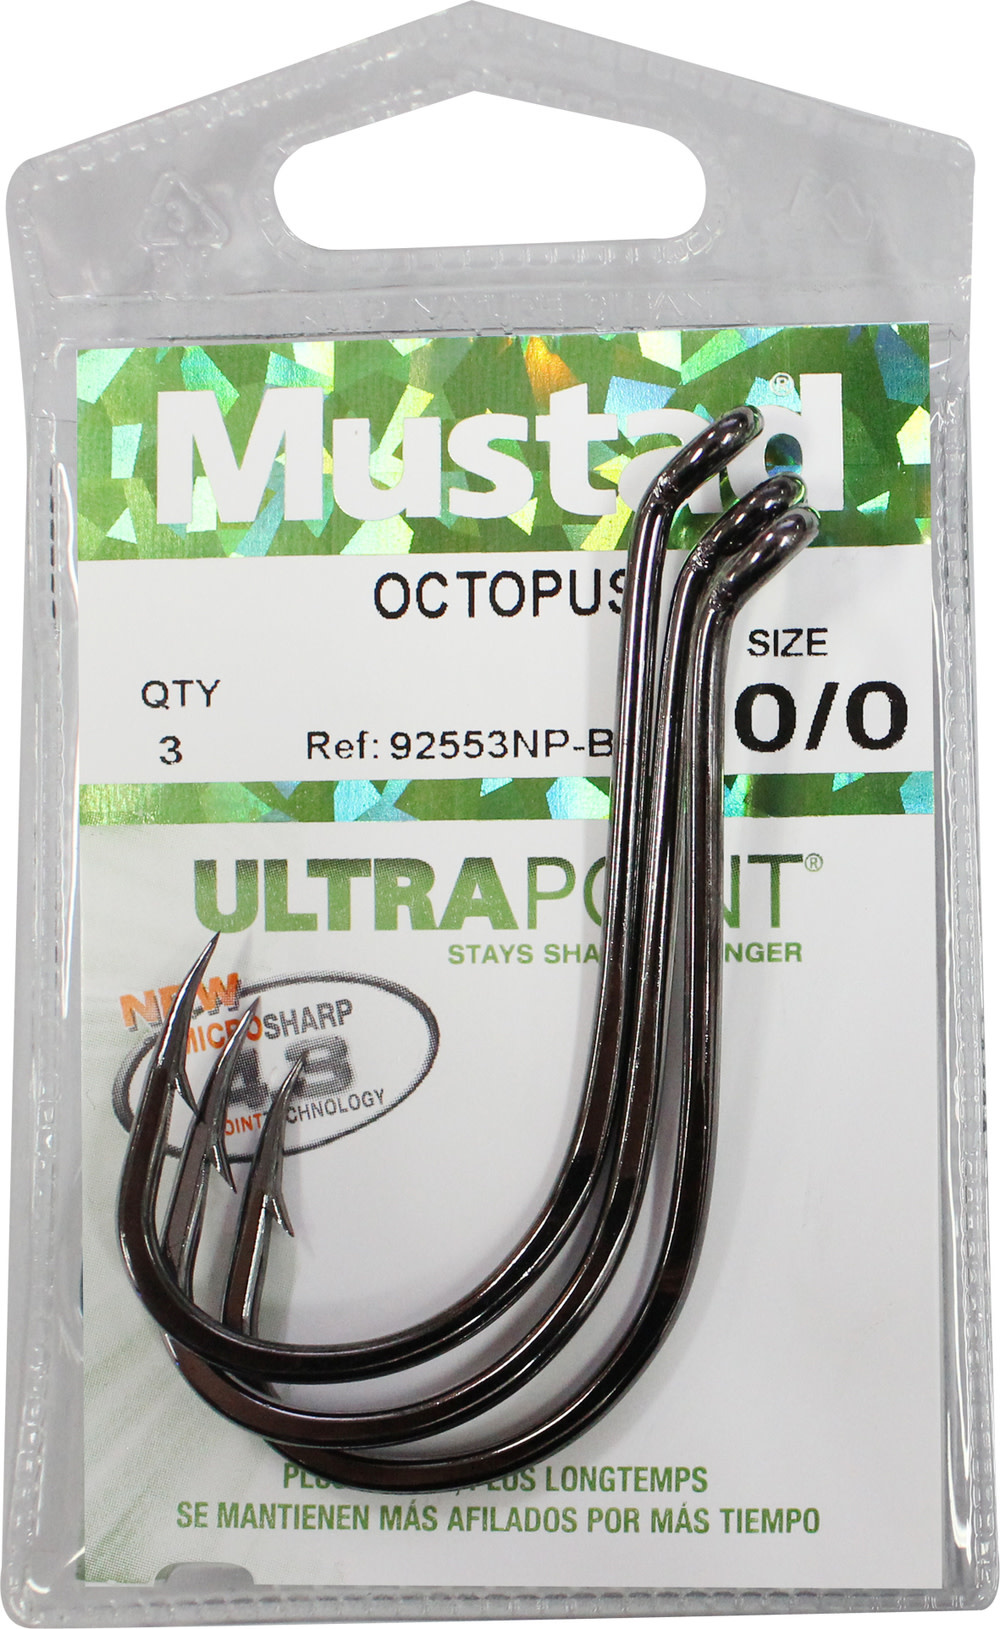 MUSTAD Octopus Hooks - Port Kennedy Cycles and Fishing